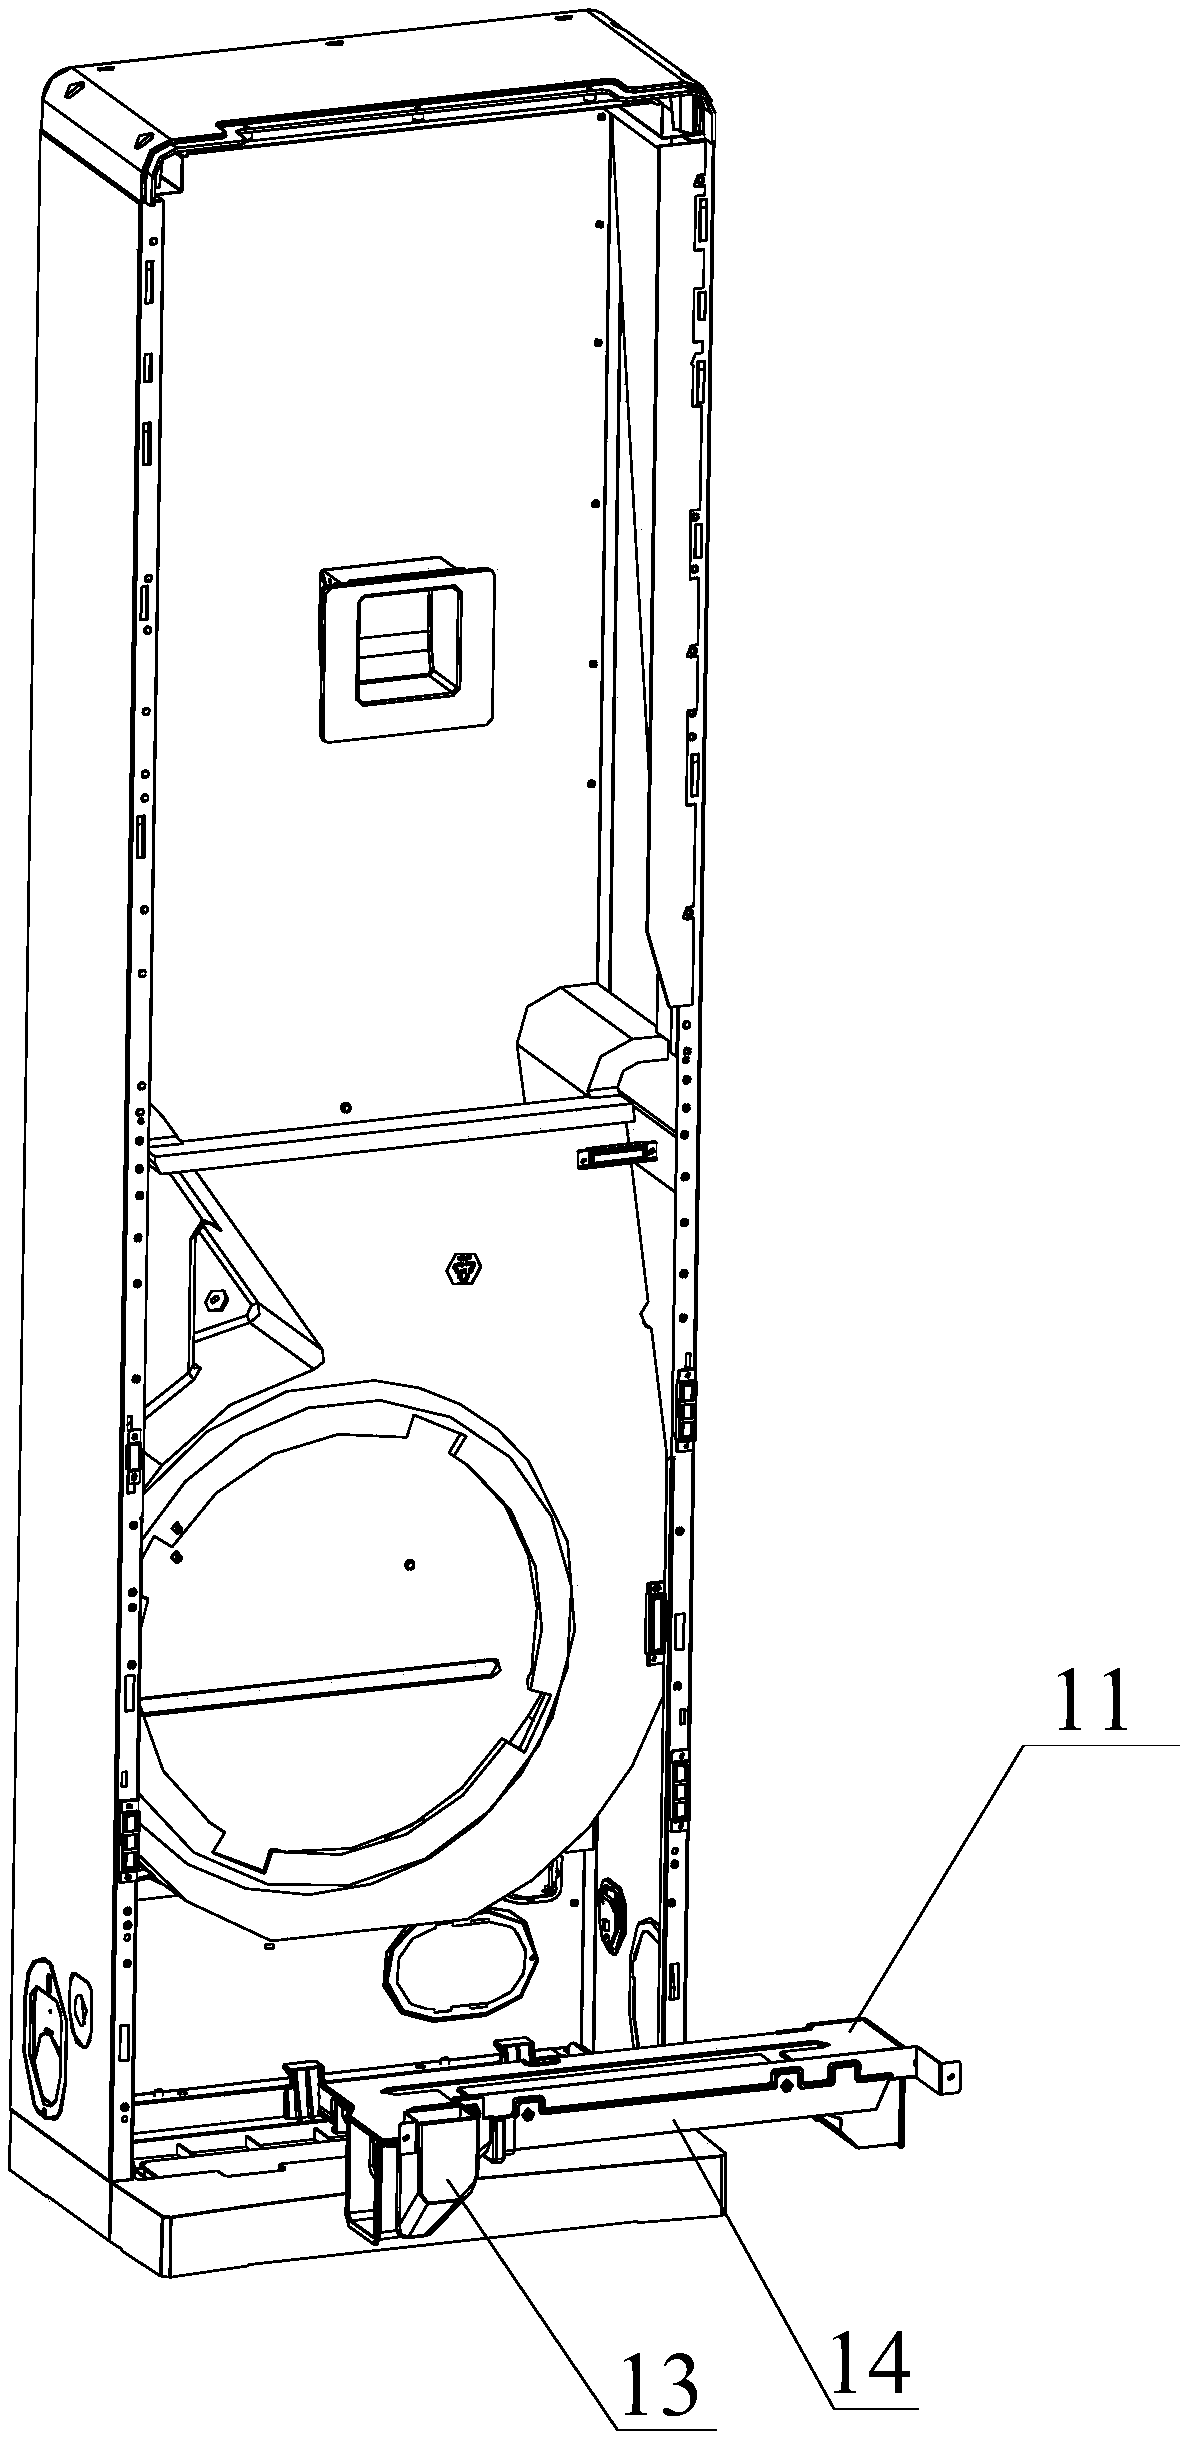 Anti-rodent structure of cabinet machine and air conditioner including the anti-rodent structure